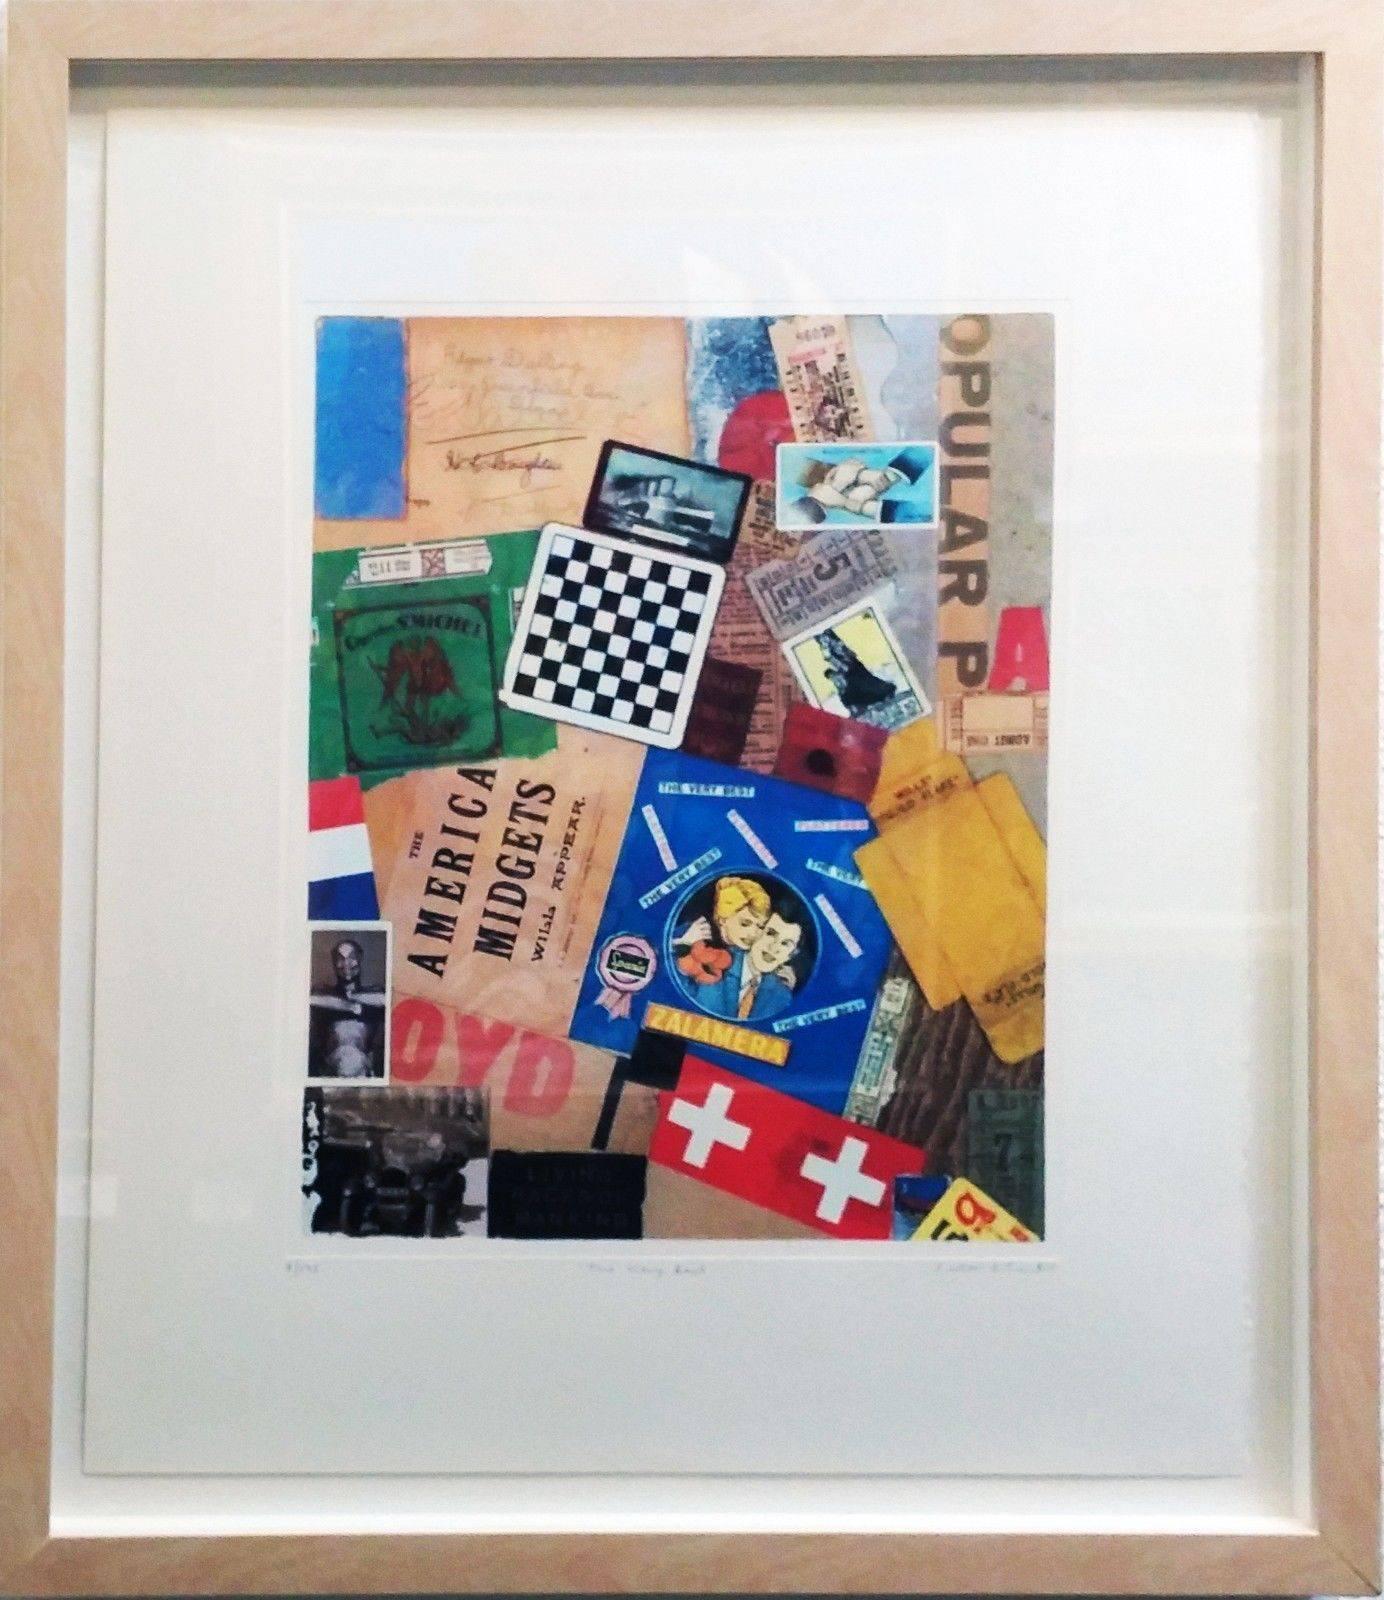 THE VERY BEST - Print by Peter Blake